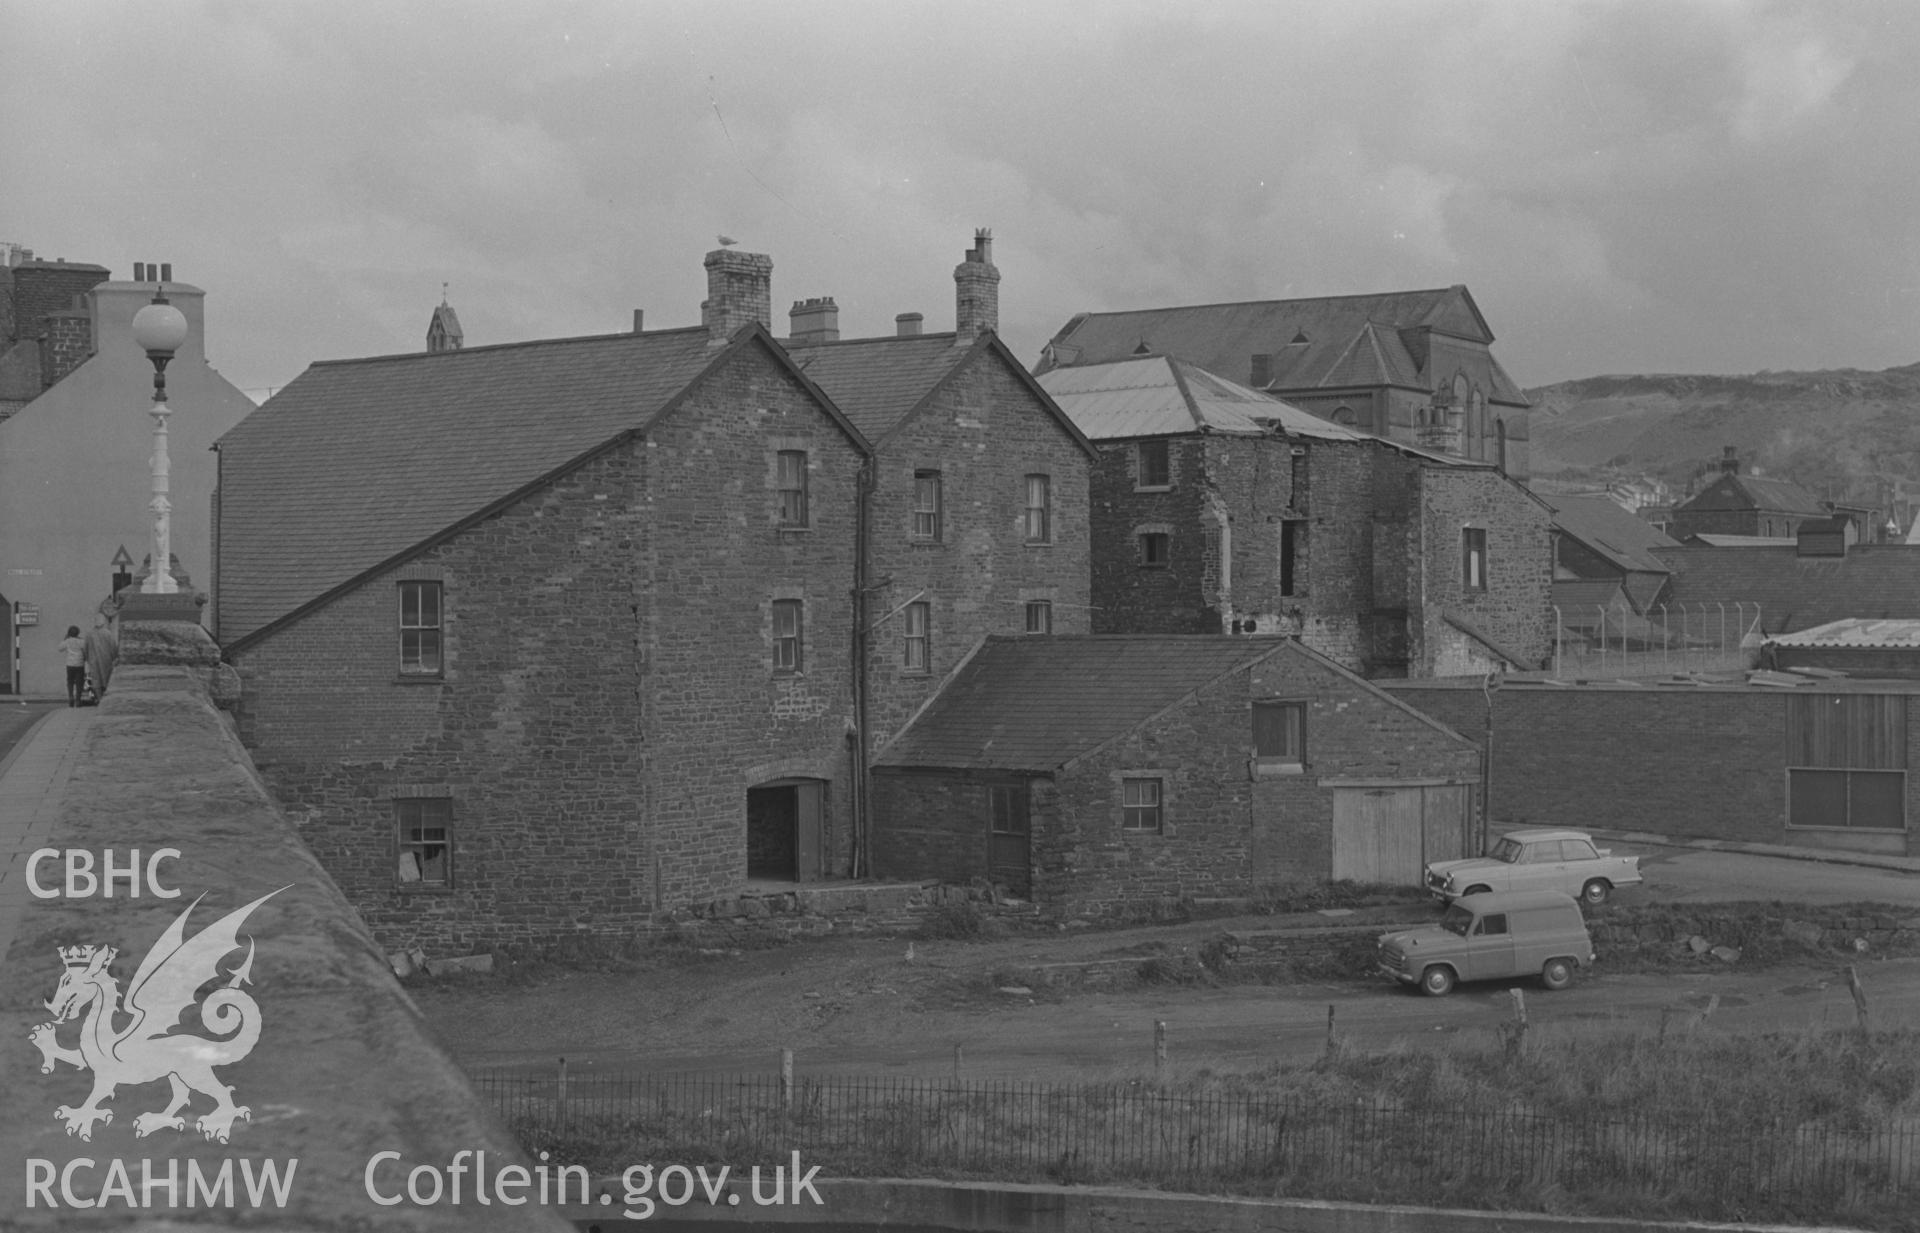 Digital copy of black & white negative showing view from Trefechan Bridge of rear of mill, foundry & laundry on Mill St., Tabernacle Chapel beyond, Aberystwyth. Photographed in September 1963 by Arthur O. Chater, SN 58278 81310, looking north north east.